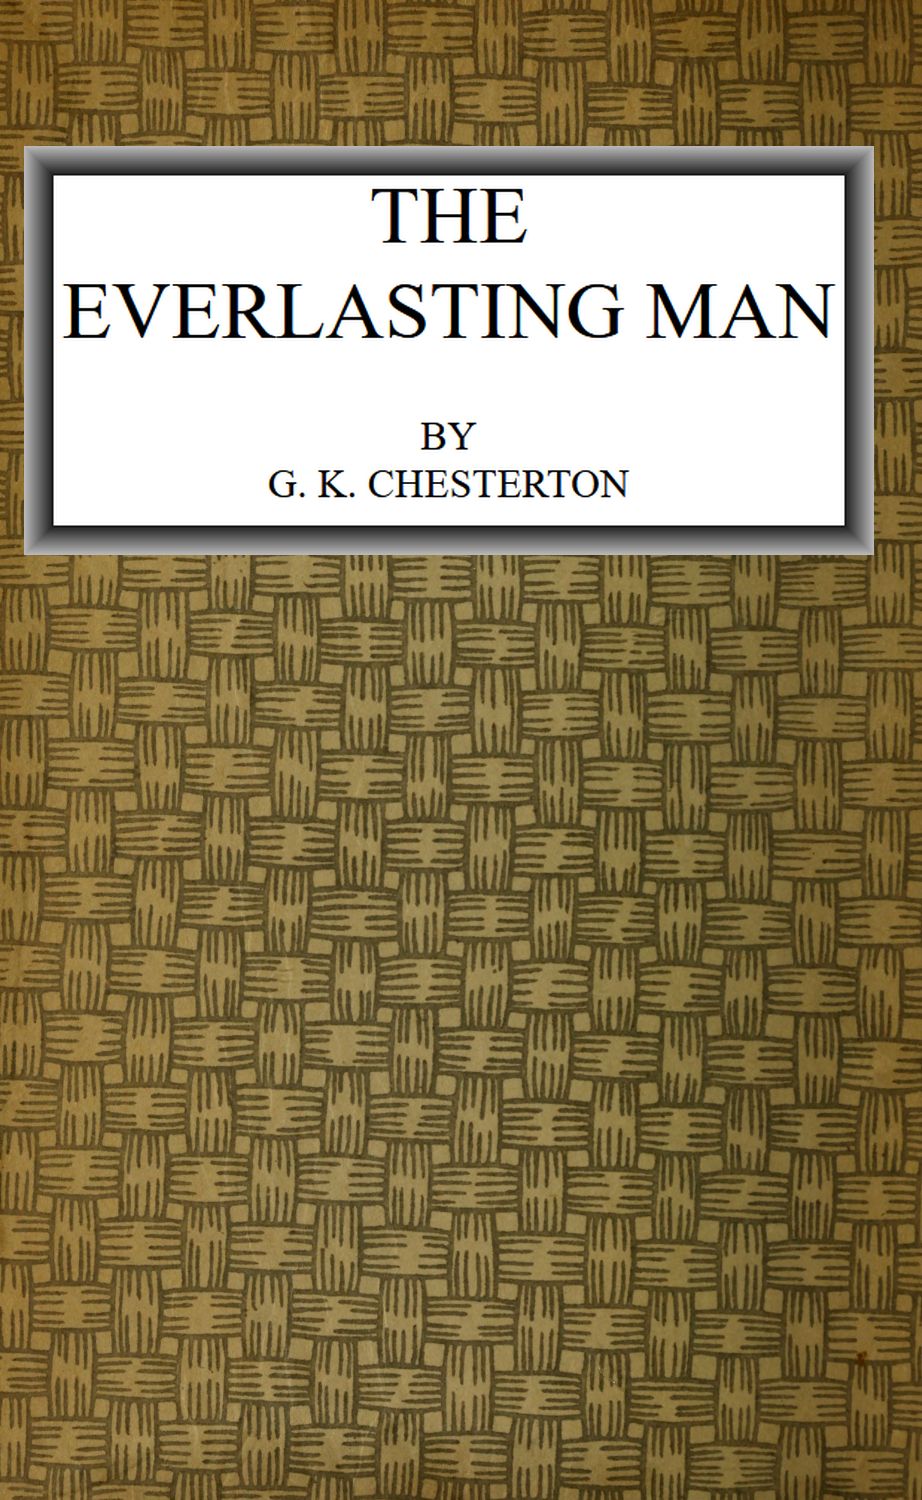 the man who was chesterton